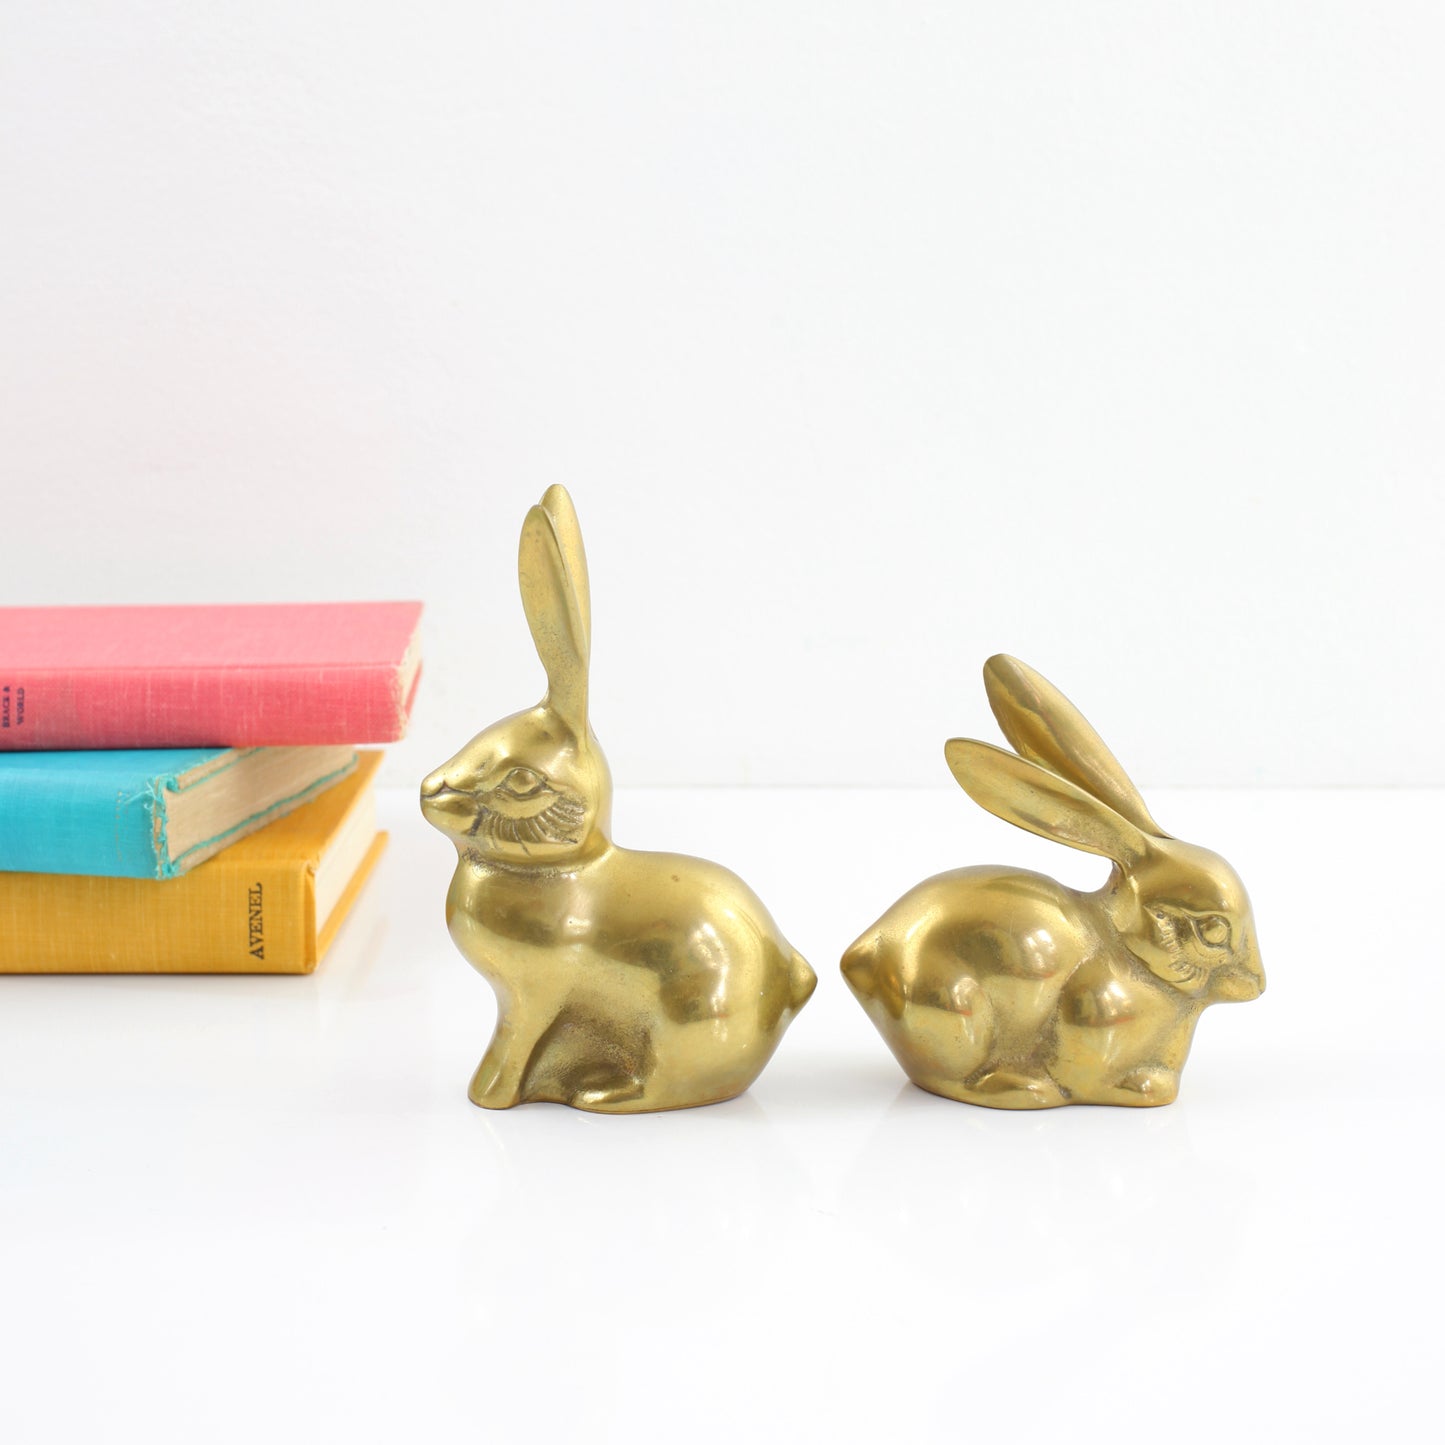 SOLD - Vintage Pair of Brass Rabbits